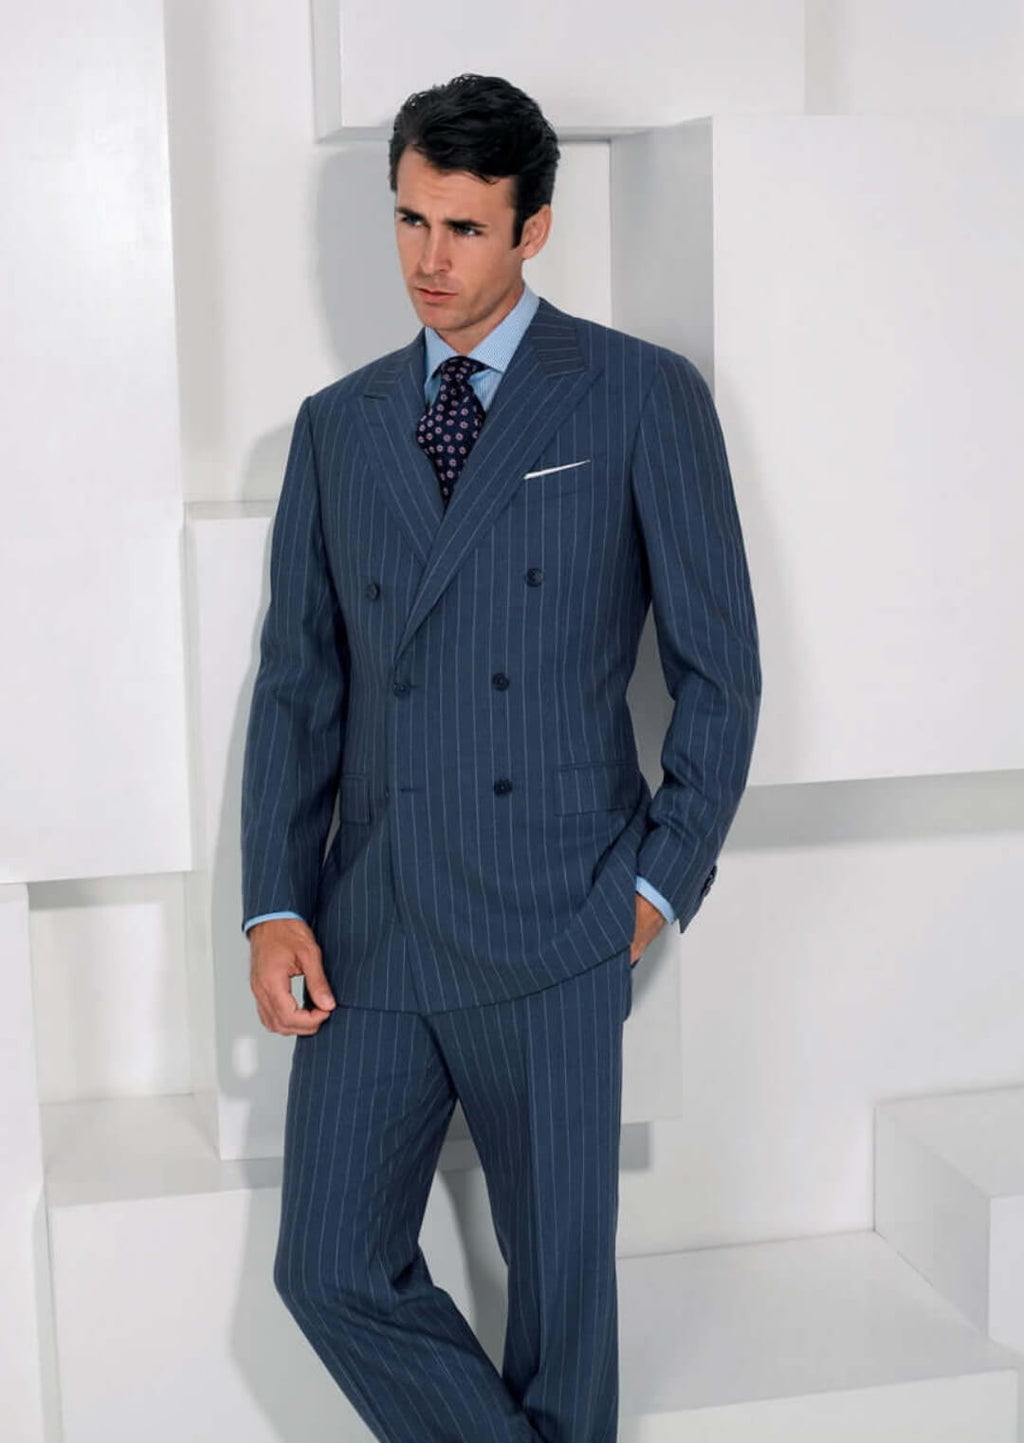 Traditional Suit Trend 22